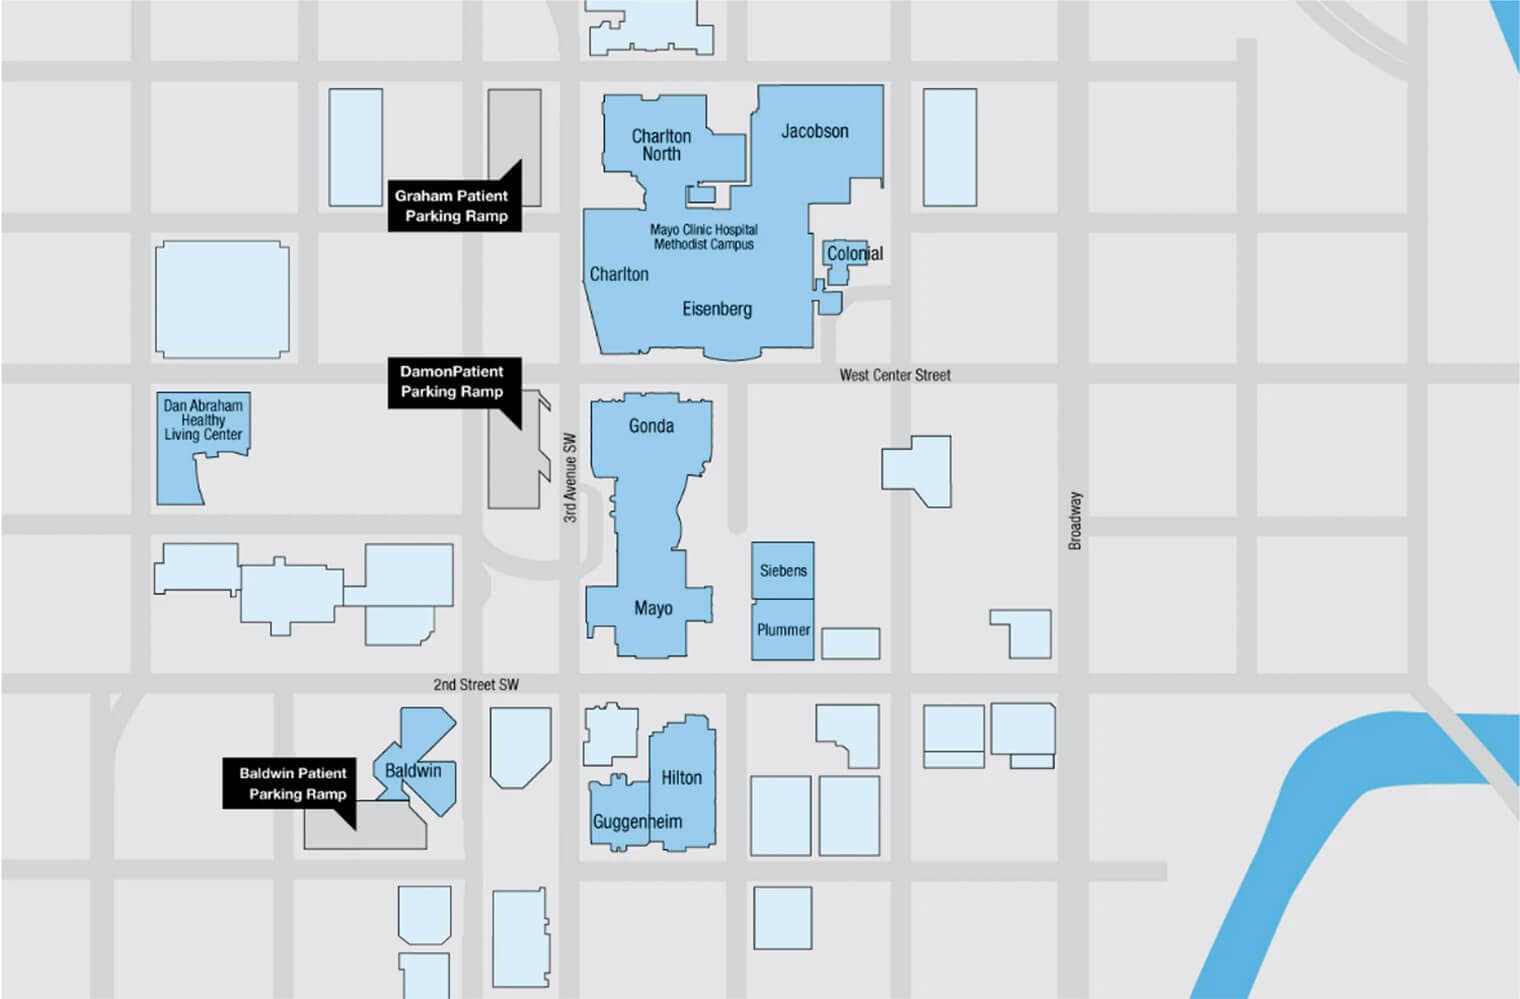 Parking map for Downtown Campus of Mayo Clinic in Rochester, Minnesota